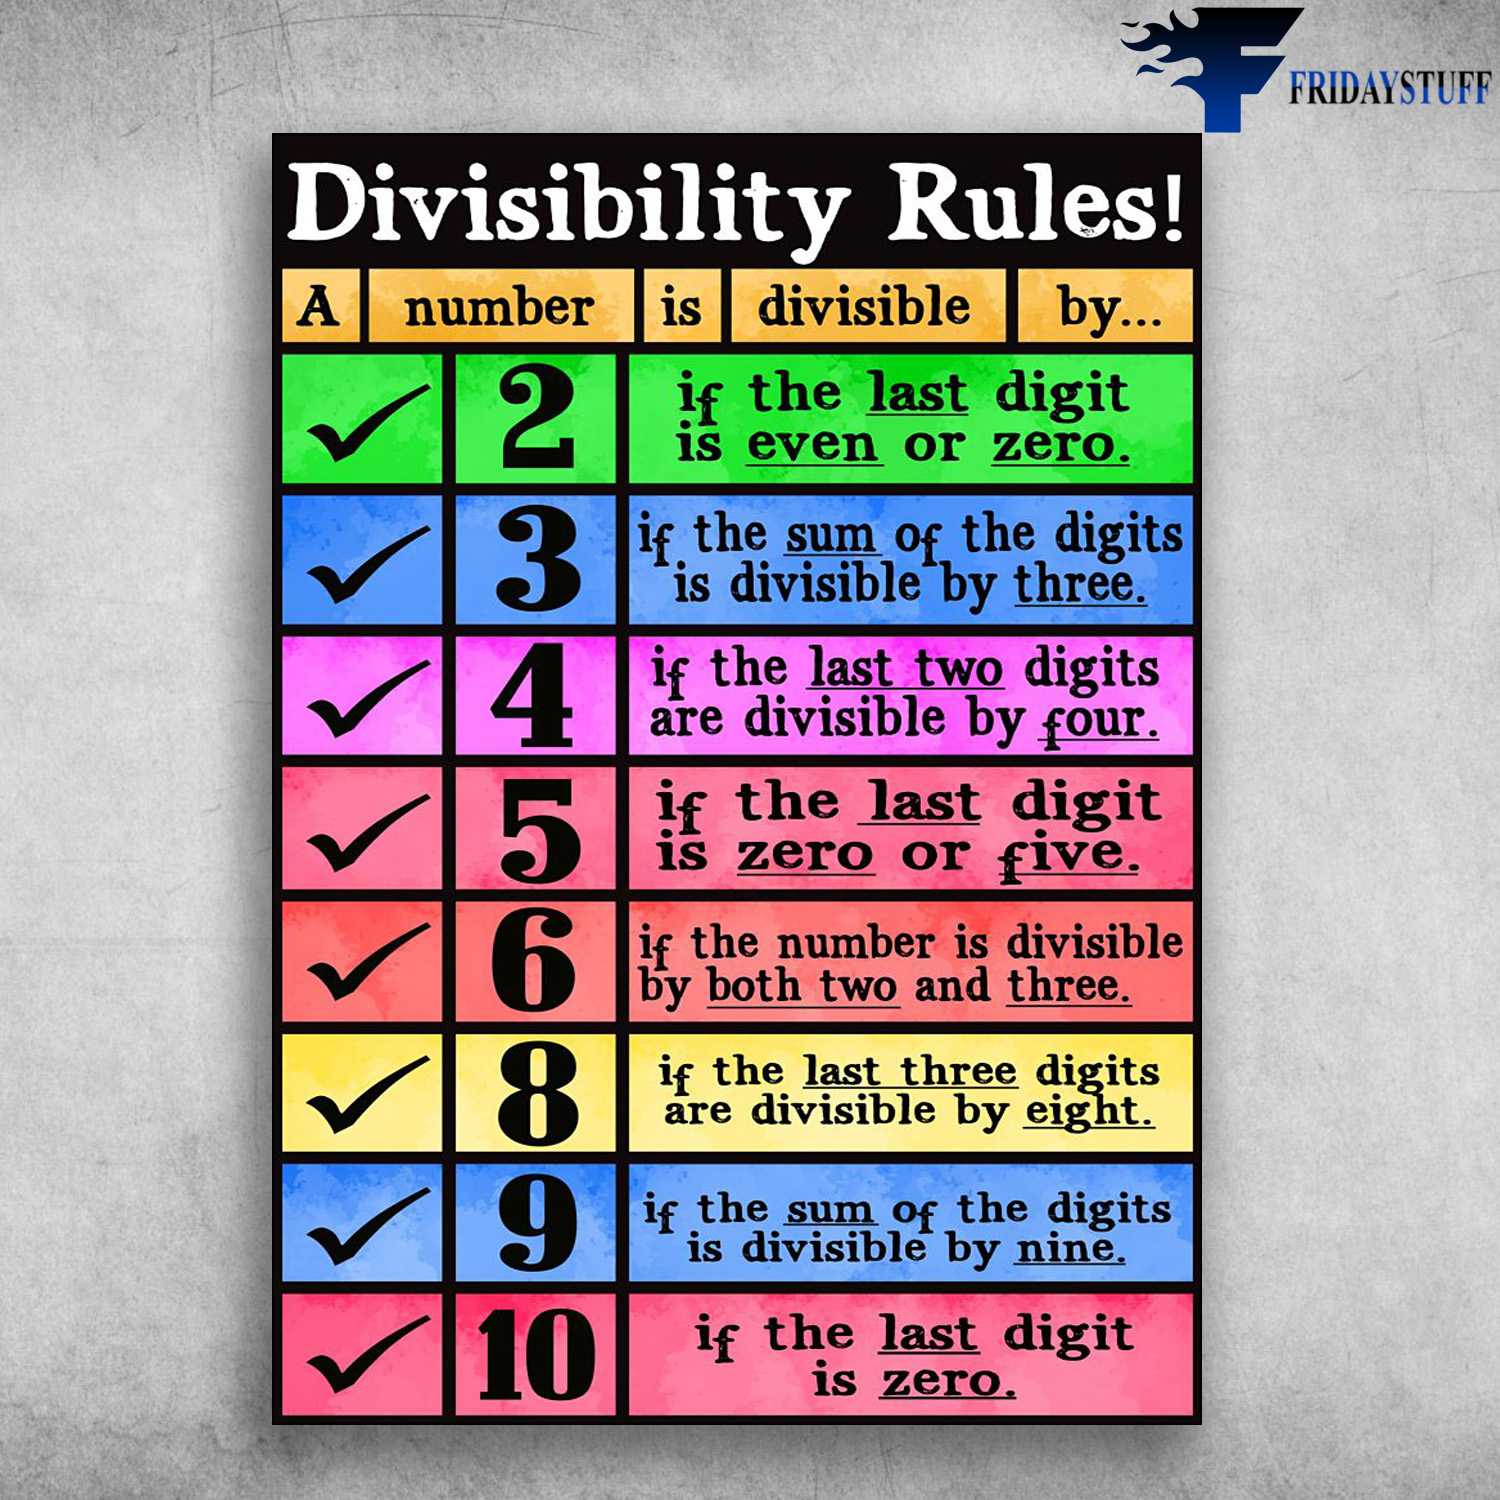 divisibility-rules-a-number-is-divisible-by-if-the-last-digit-is-even-or-zero-if-the-sum-of